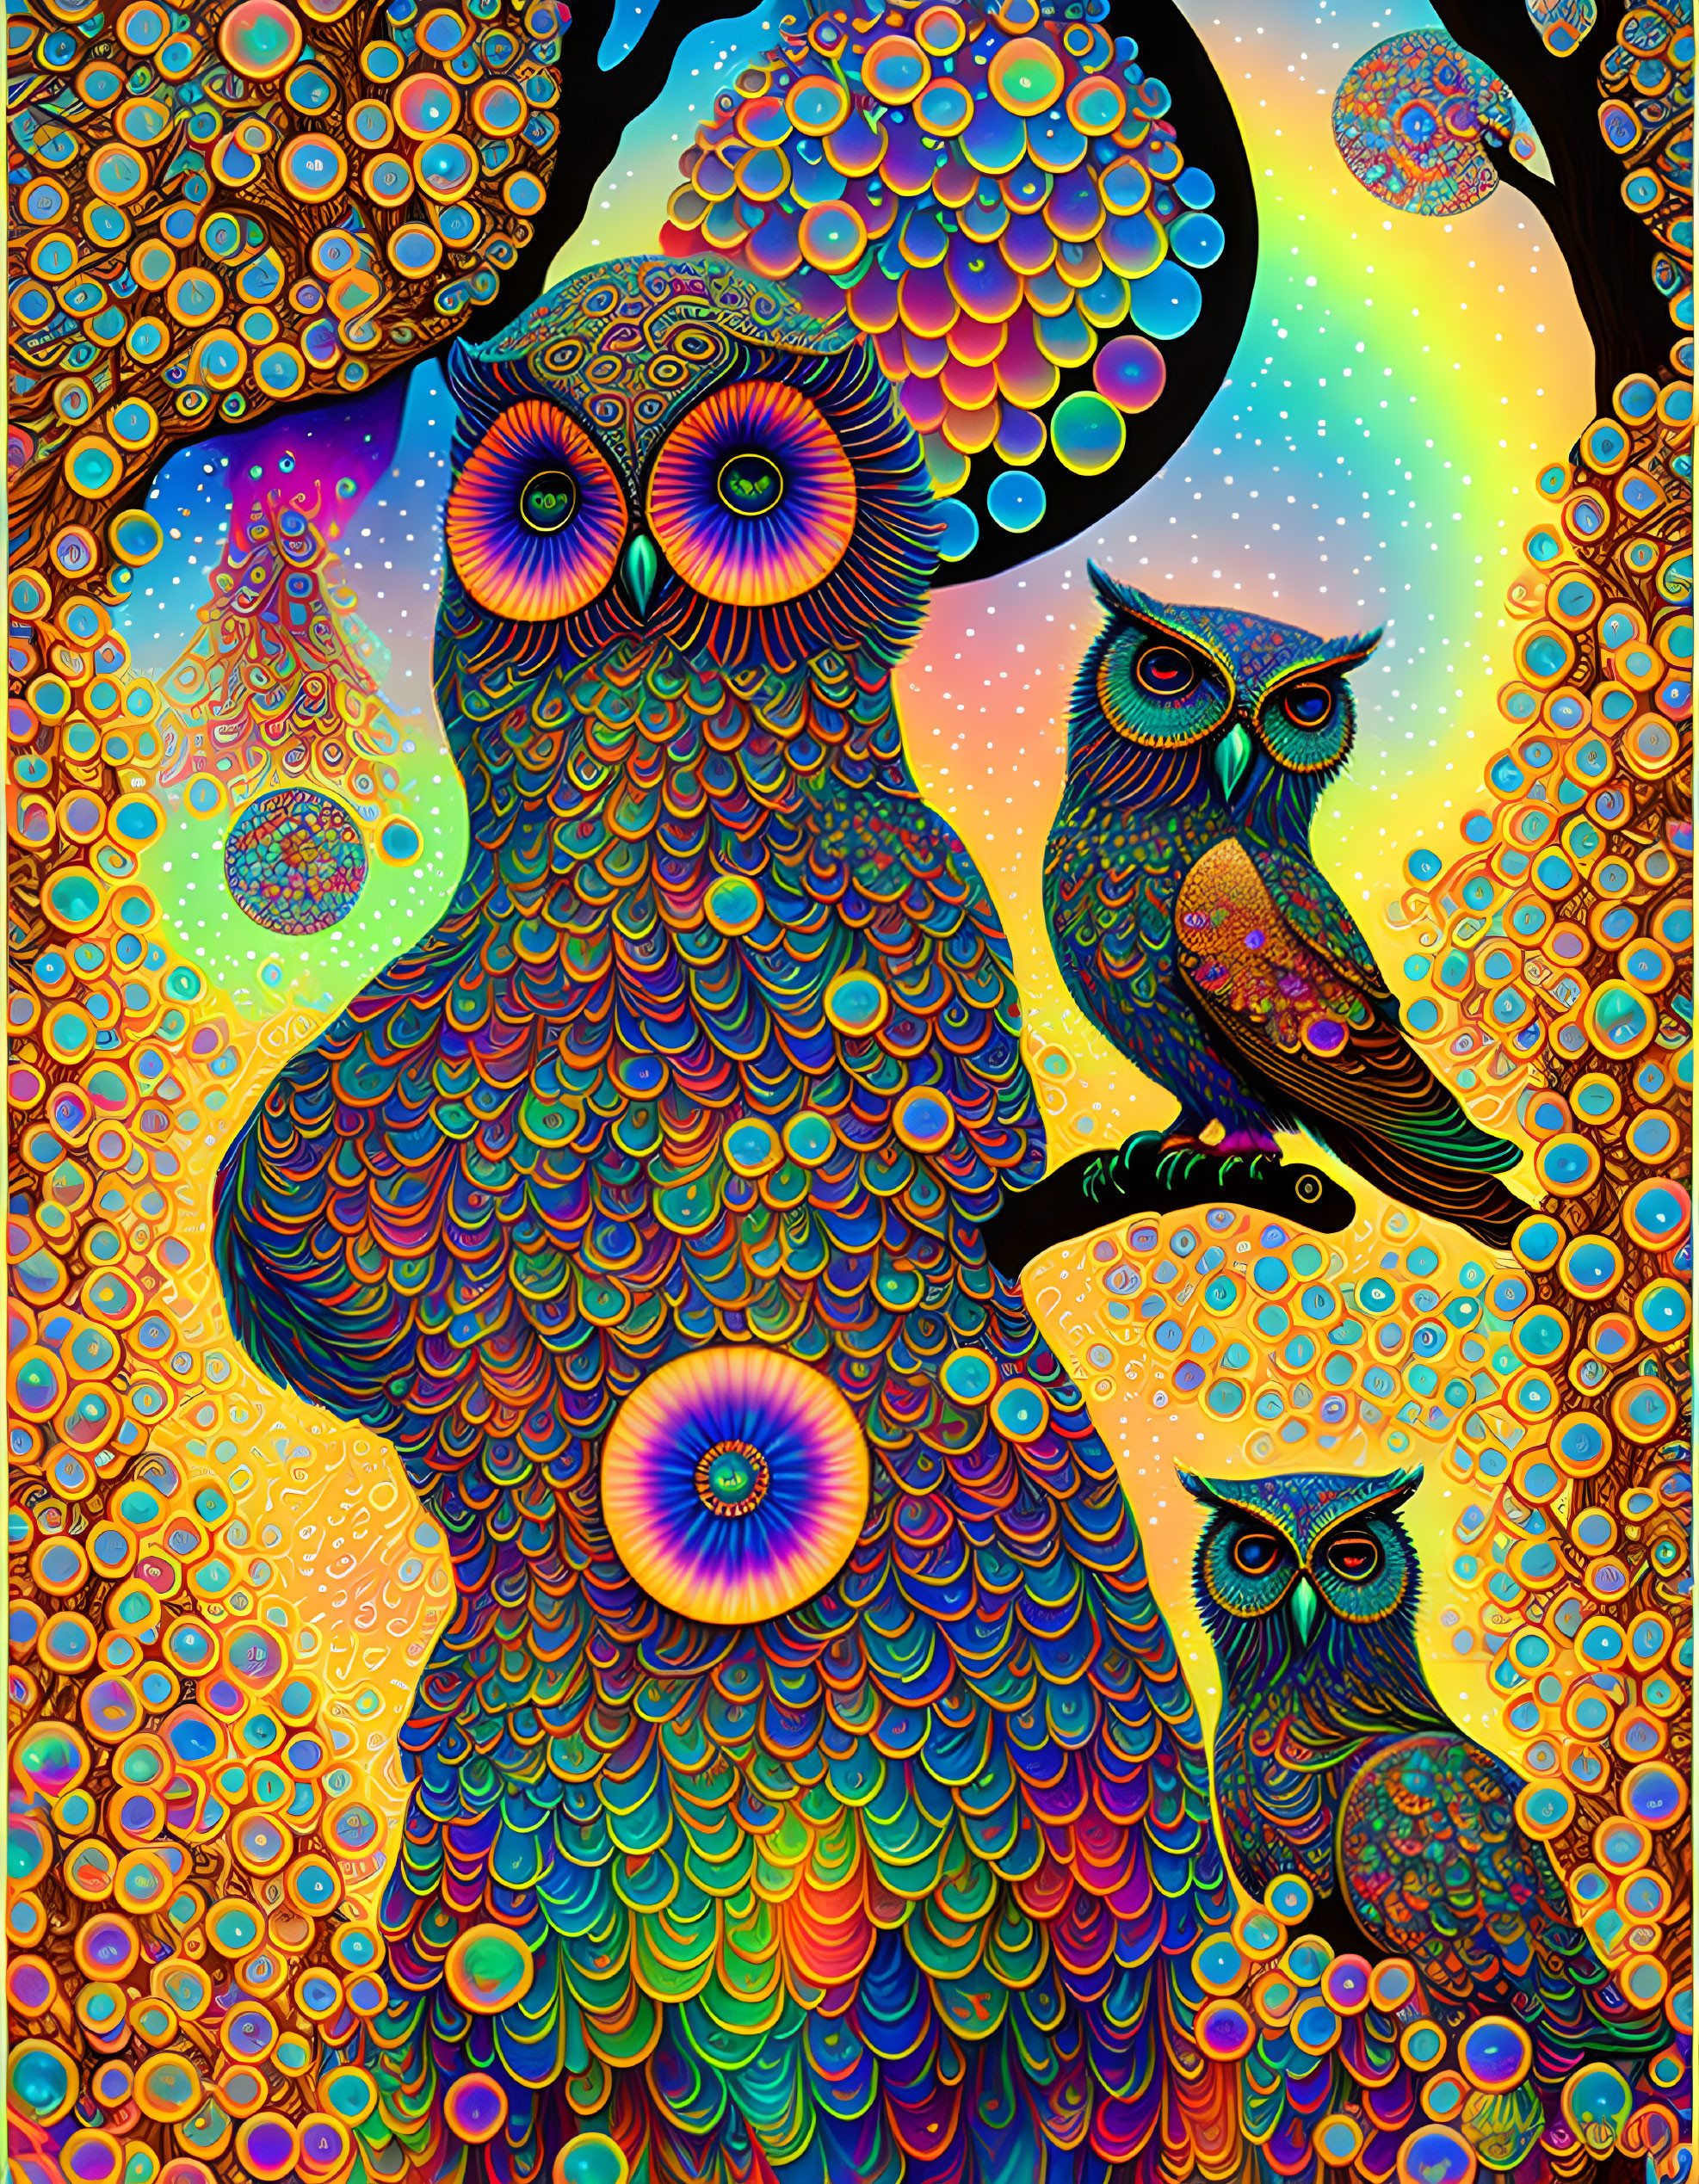 Psychedelic owls